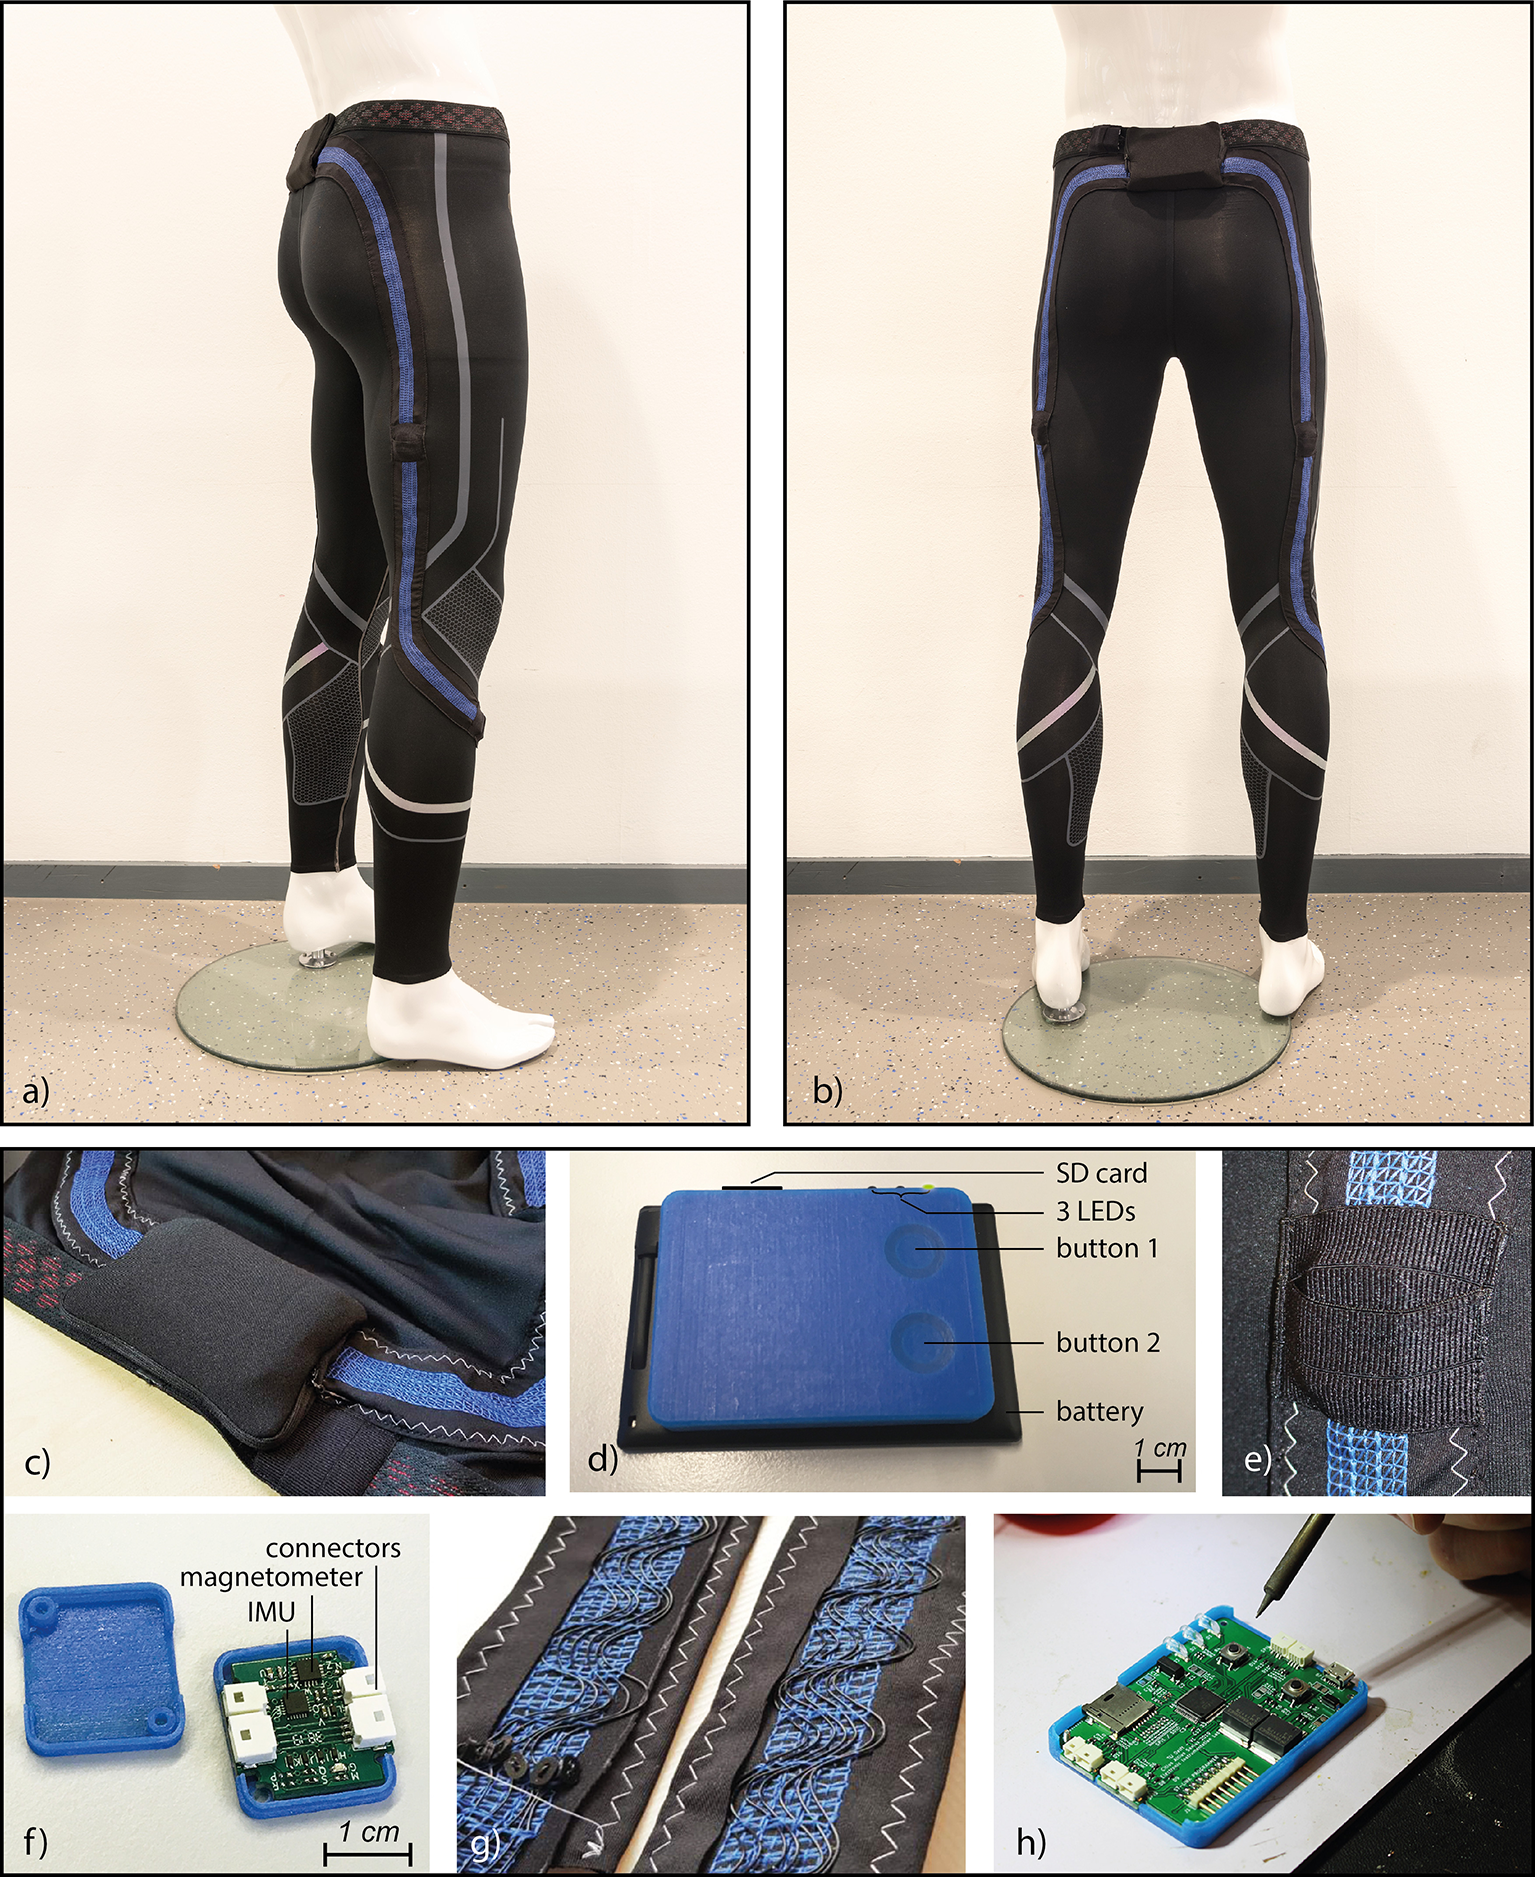 CW-X Men's Stabilyx Joint Support Compression India